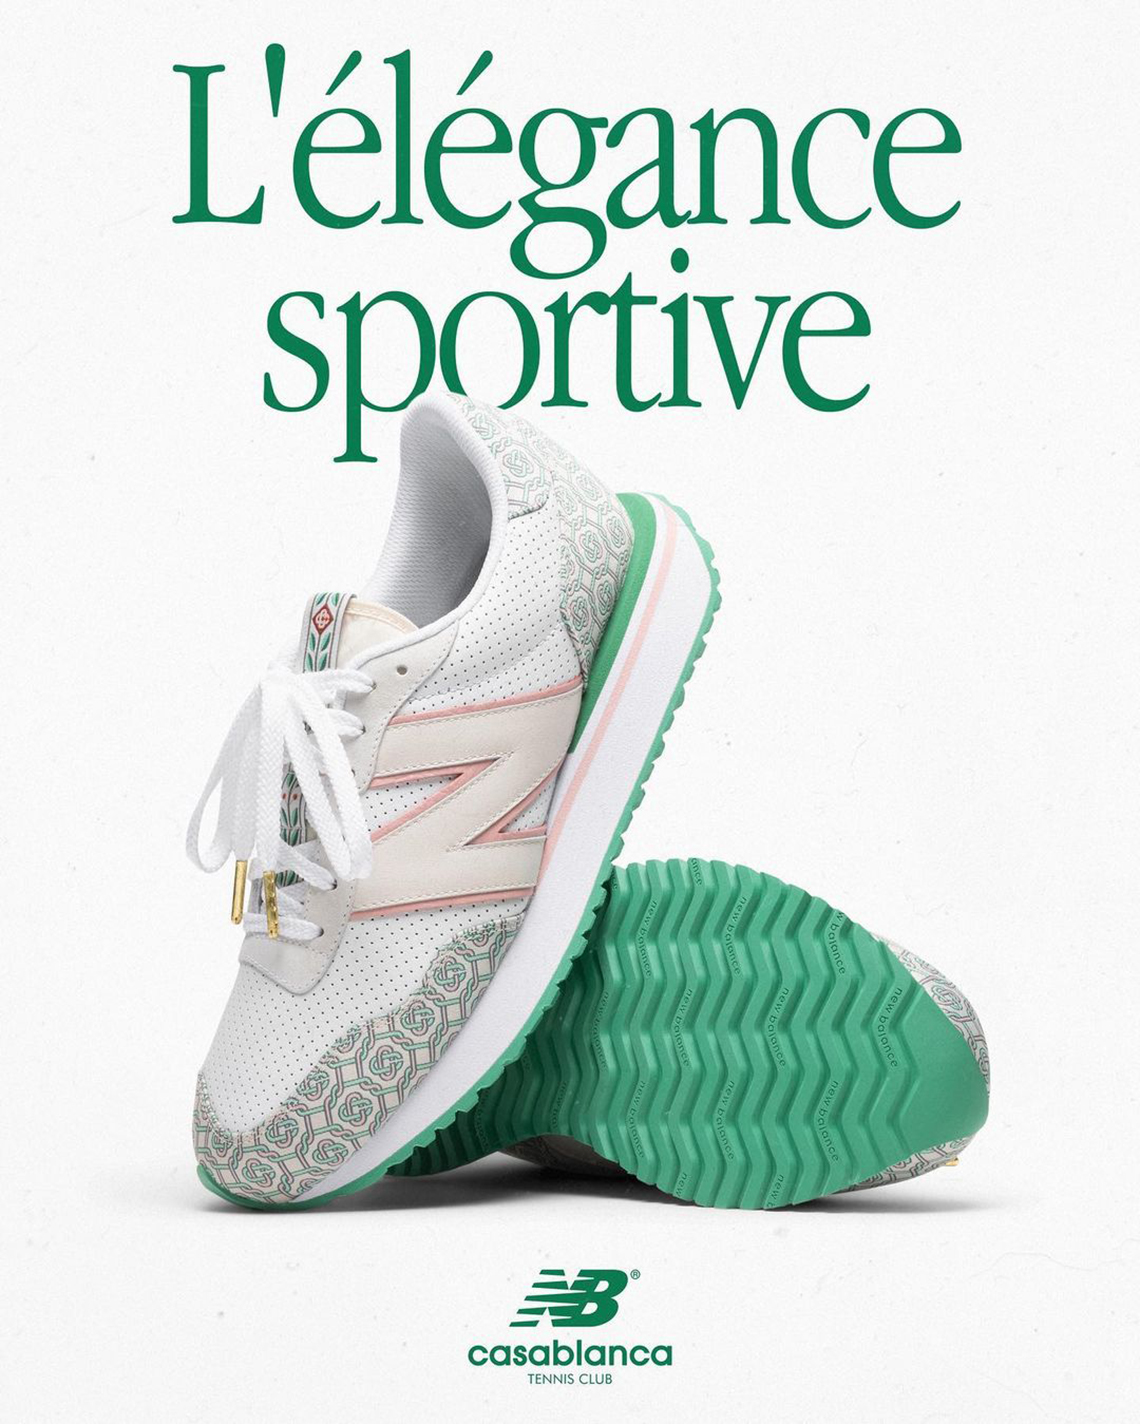 new balance upcoming releases